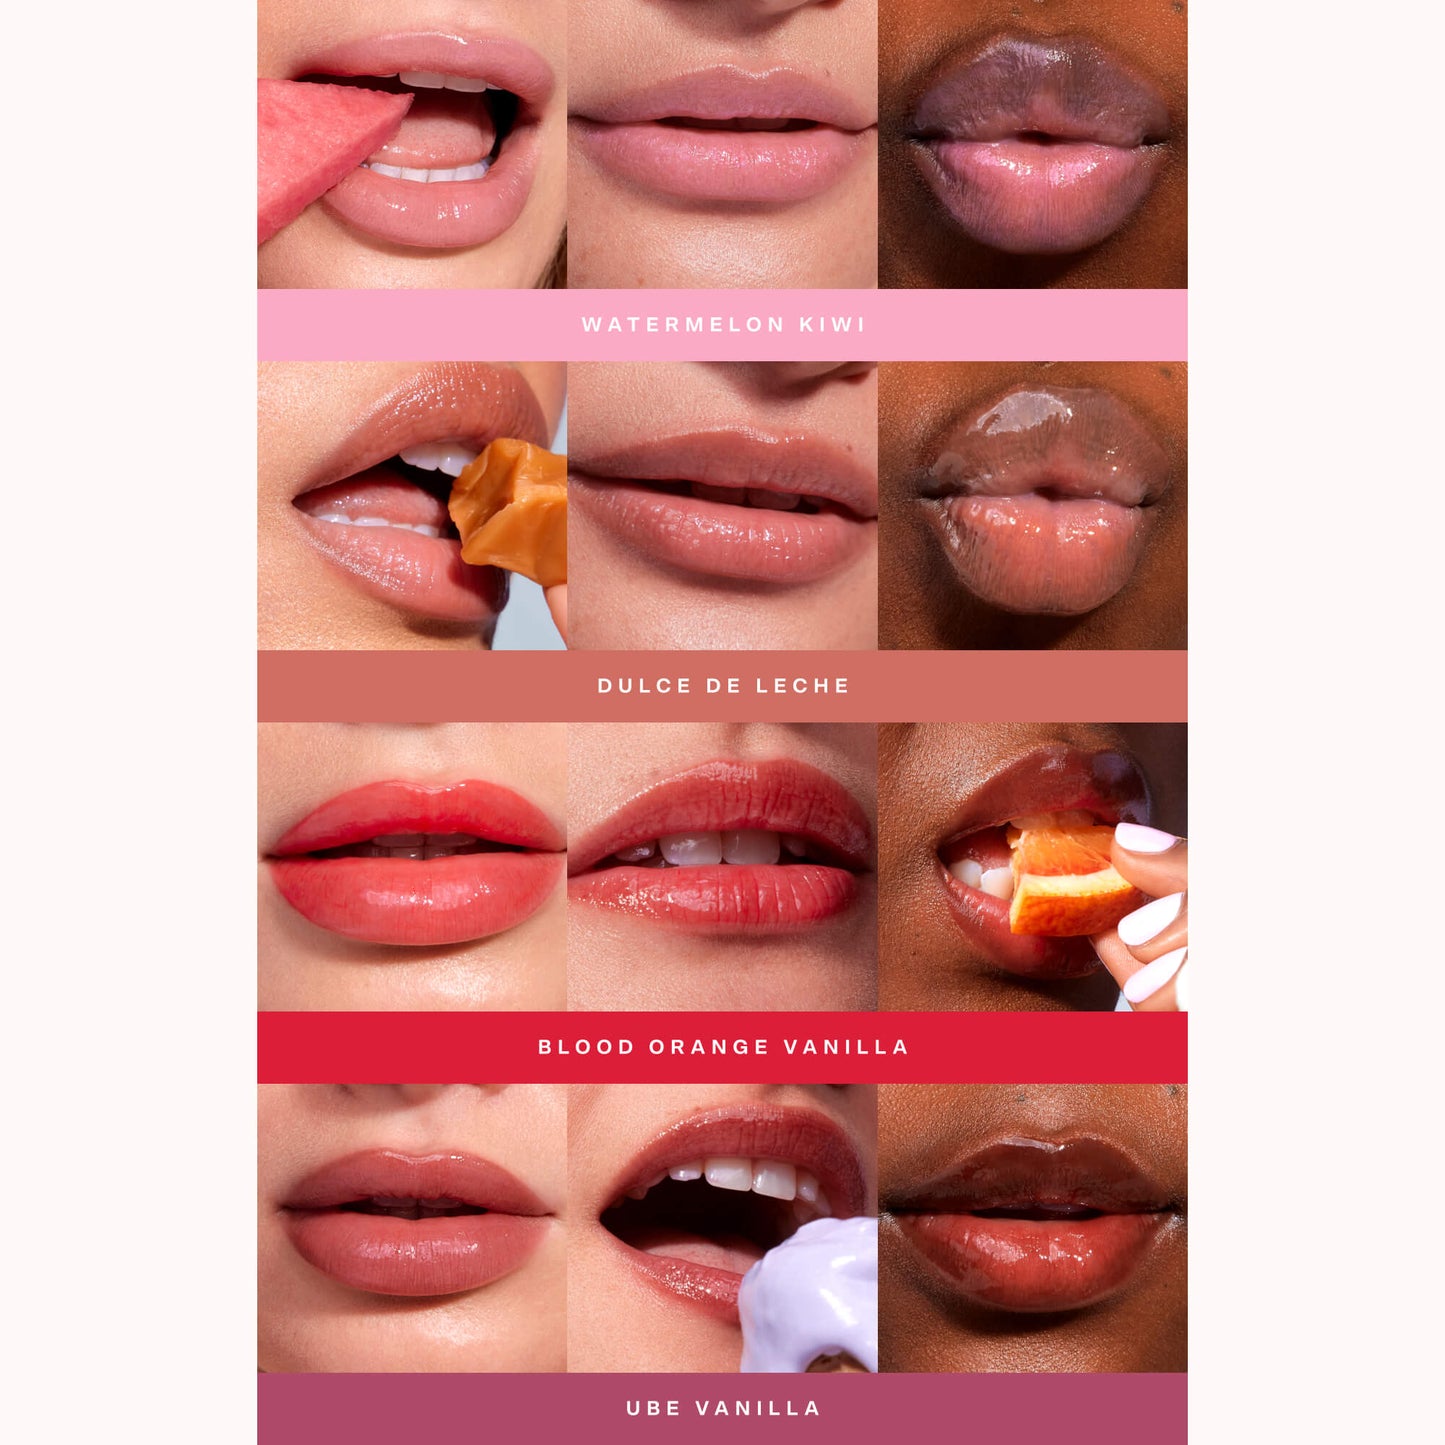 [Shared: Tinted shades of the Tower 28 Beauty LipSoftie™ Lip Treatment applied on three different skin tones]